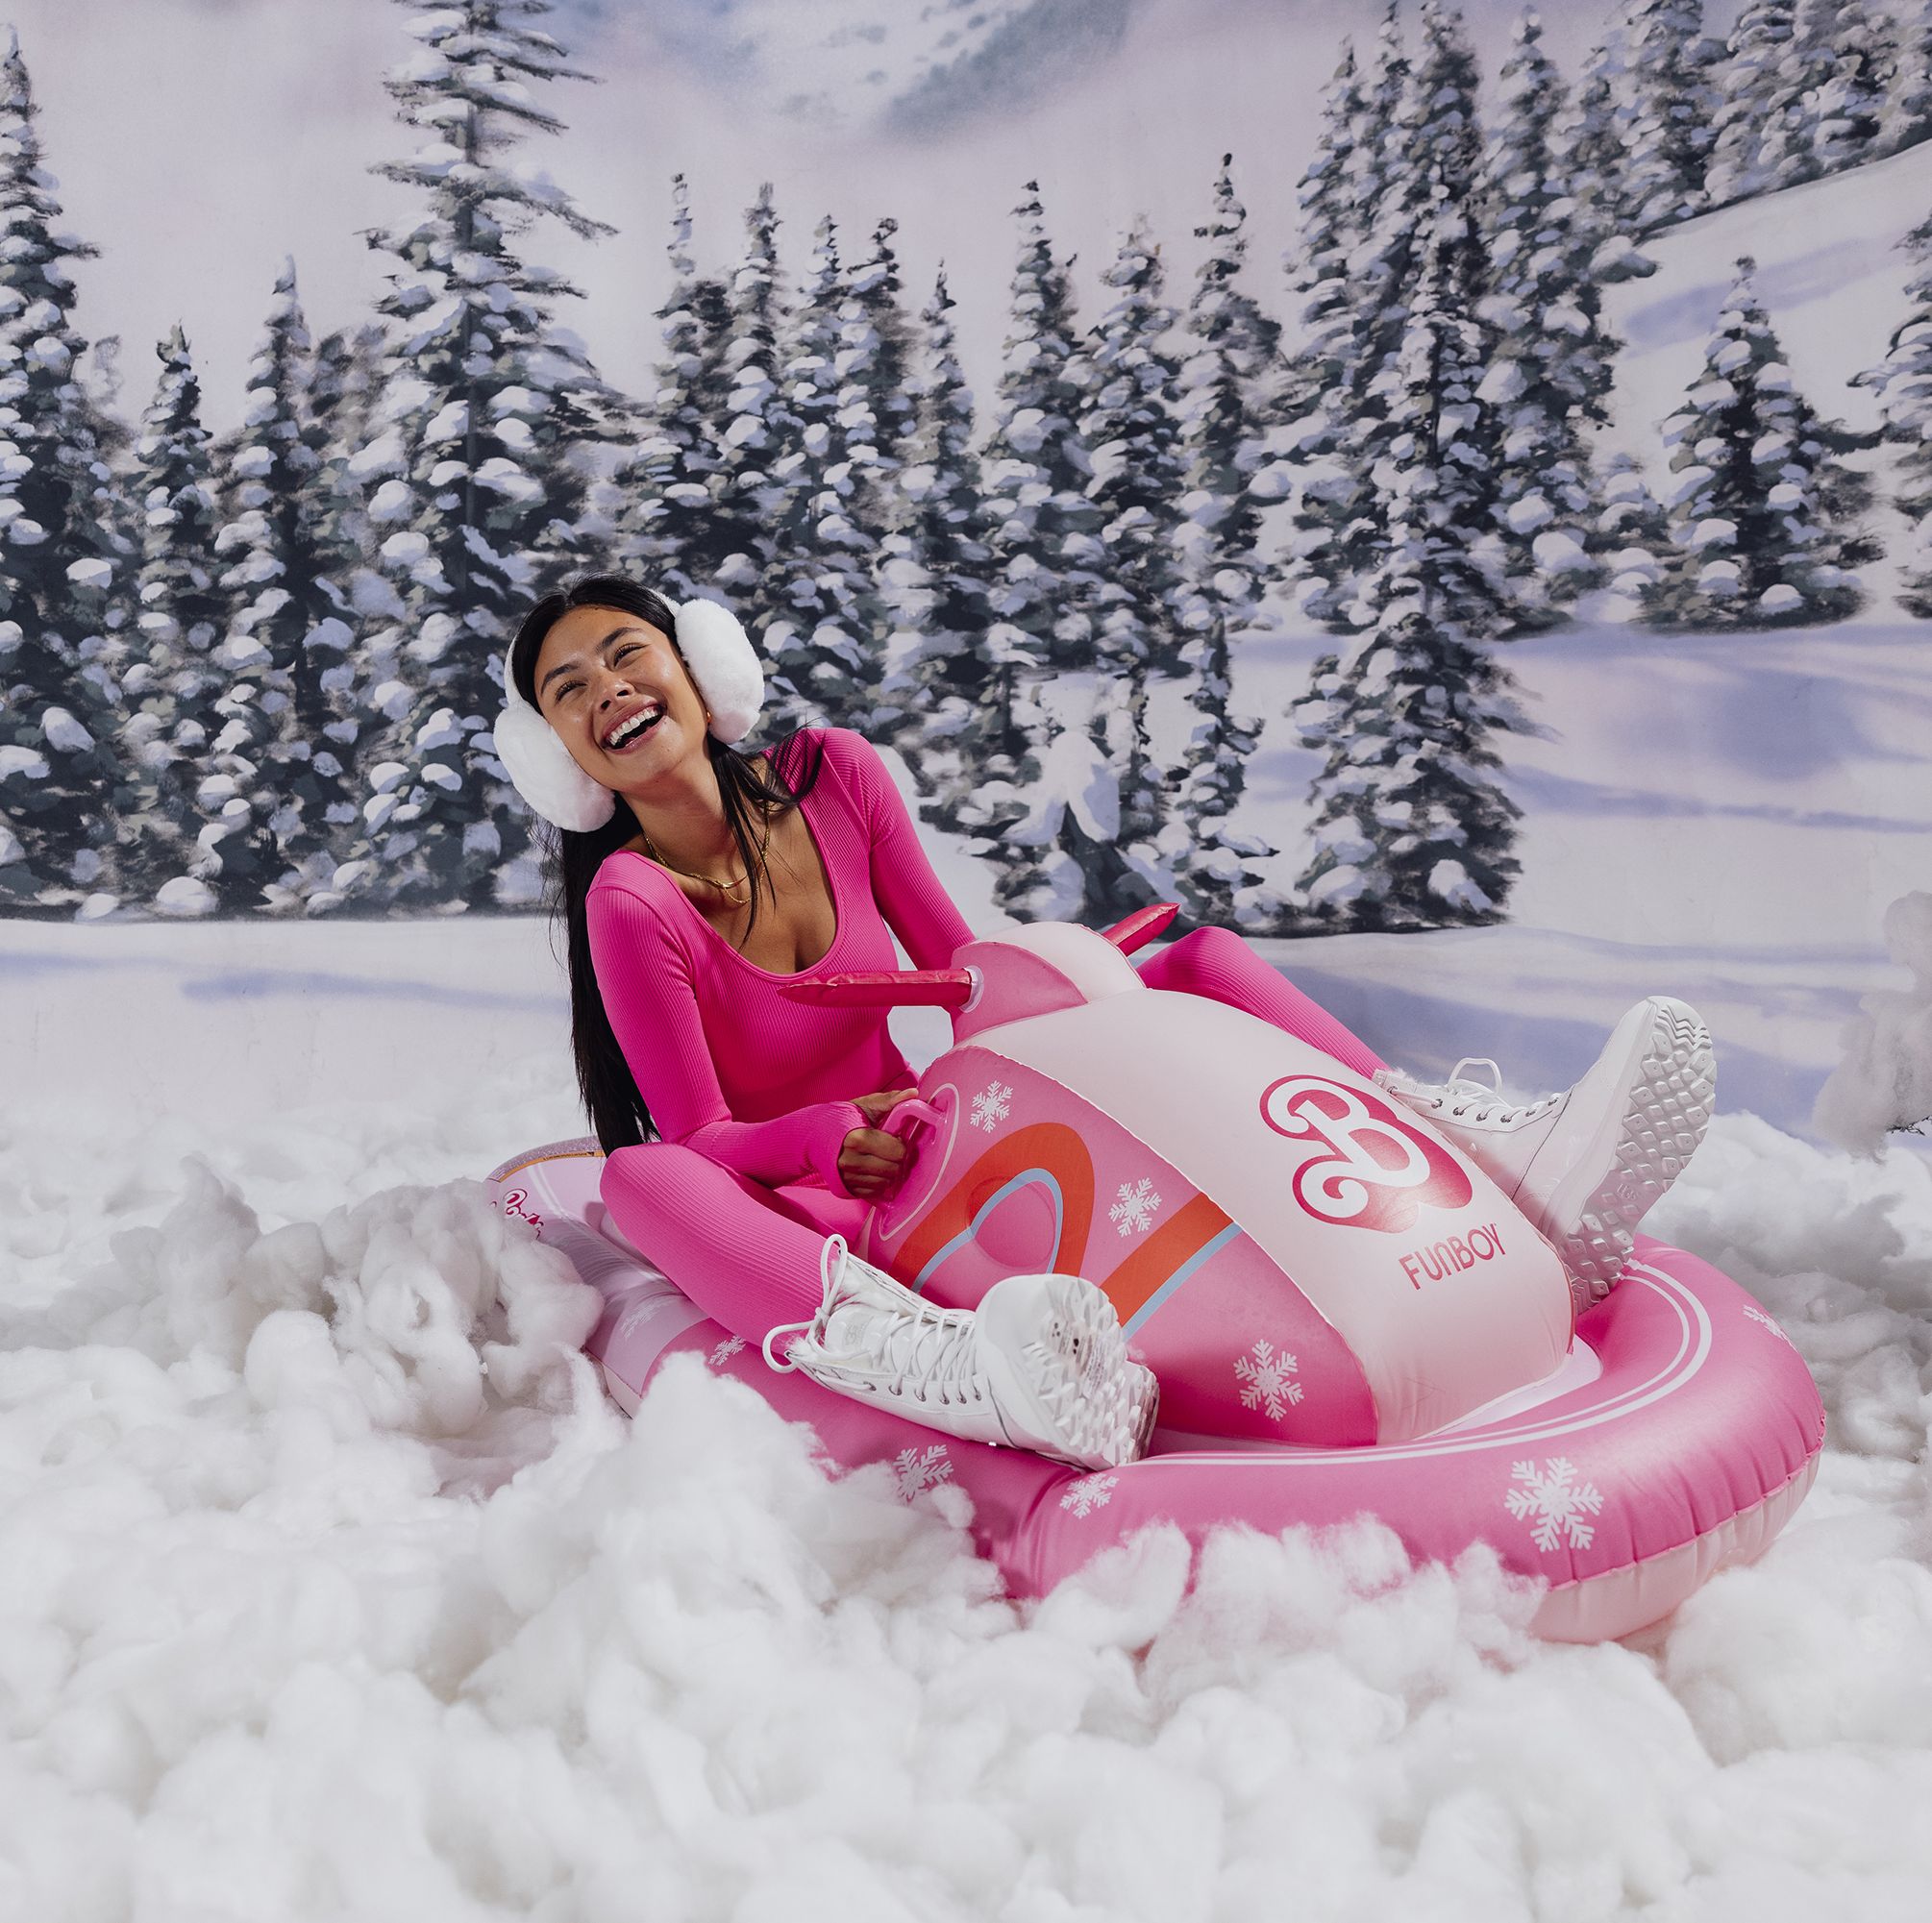 Yes, You Need an Inflatable Barbie Snow Sled This Winter